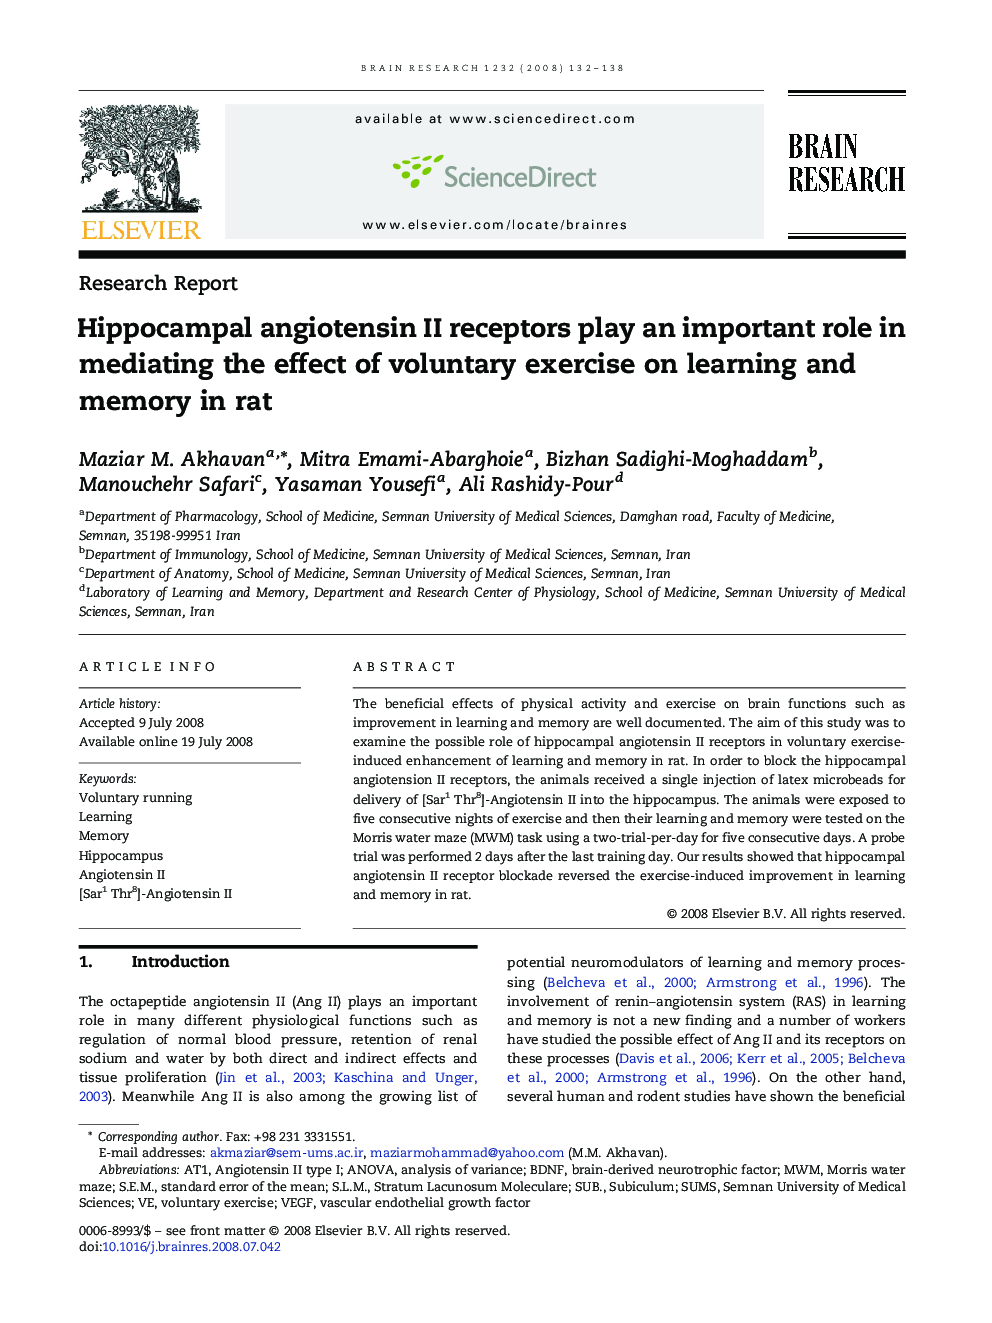 Hippocampal angiotensin II receptors play an important role in mediating the effect of voluntary exercise on learning and memory in rat